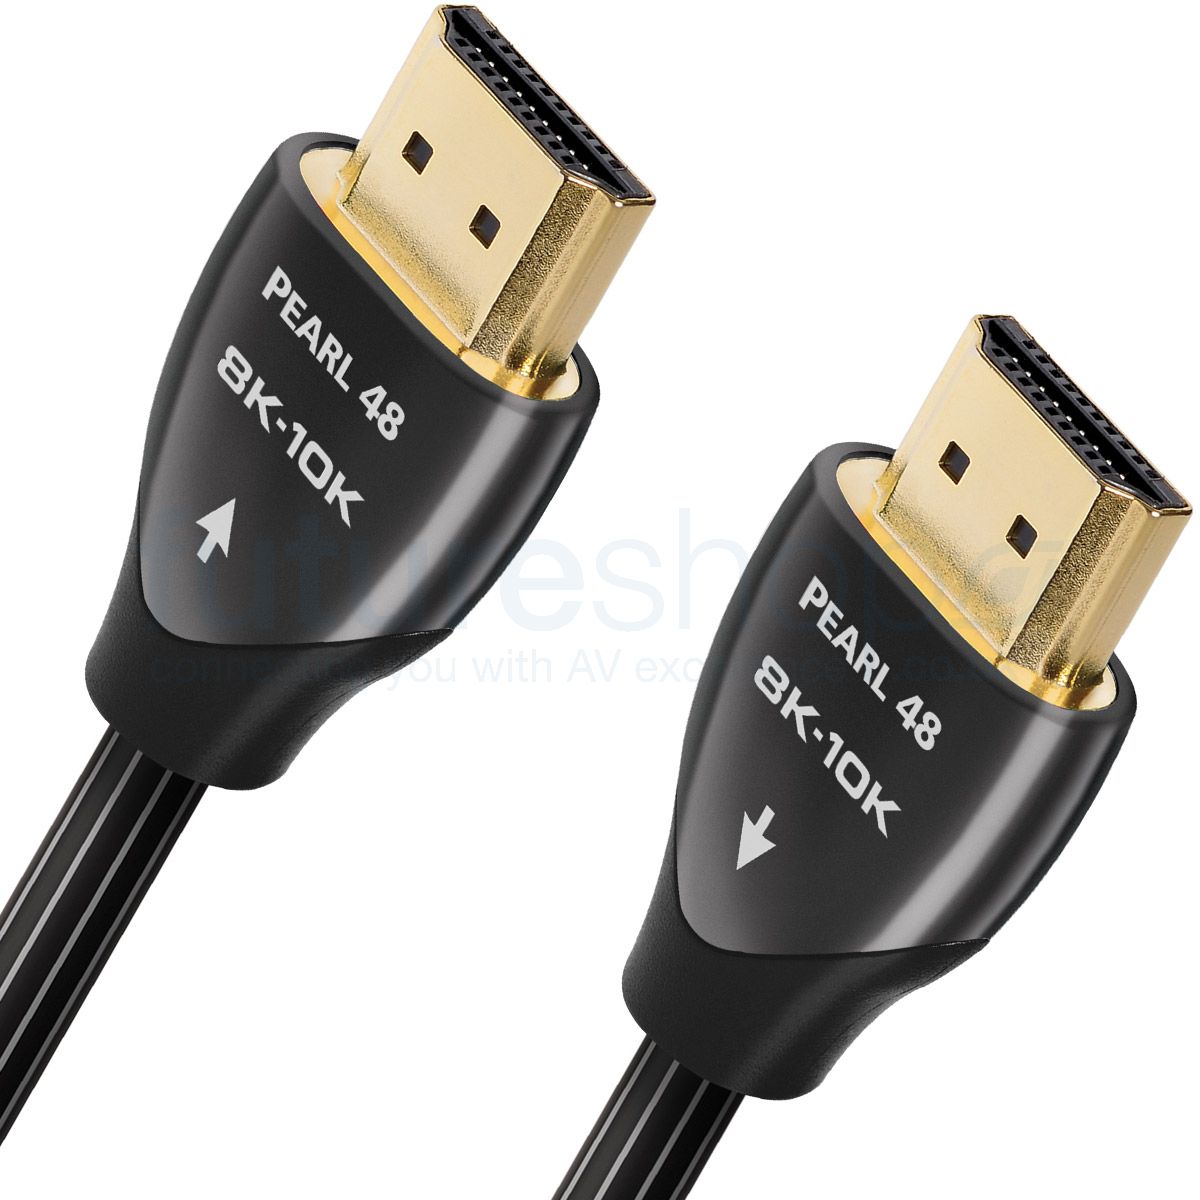  AudioQuest 3886530070 HDMI Cable : Electronics